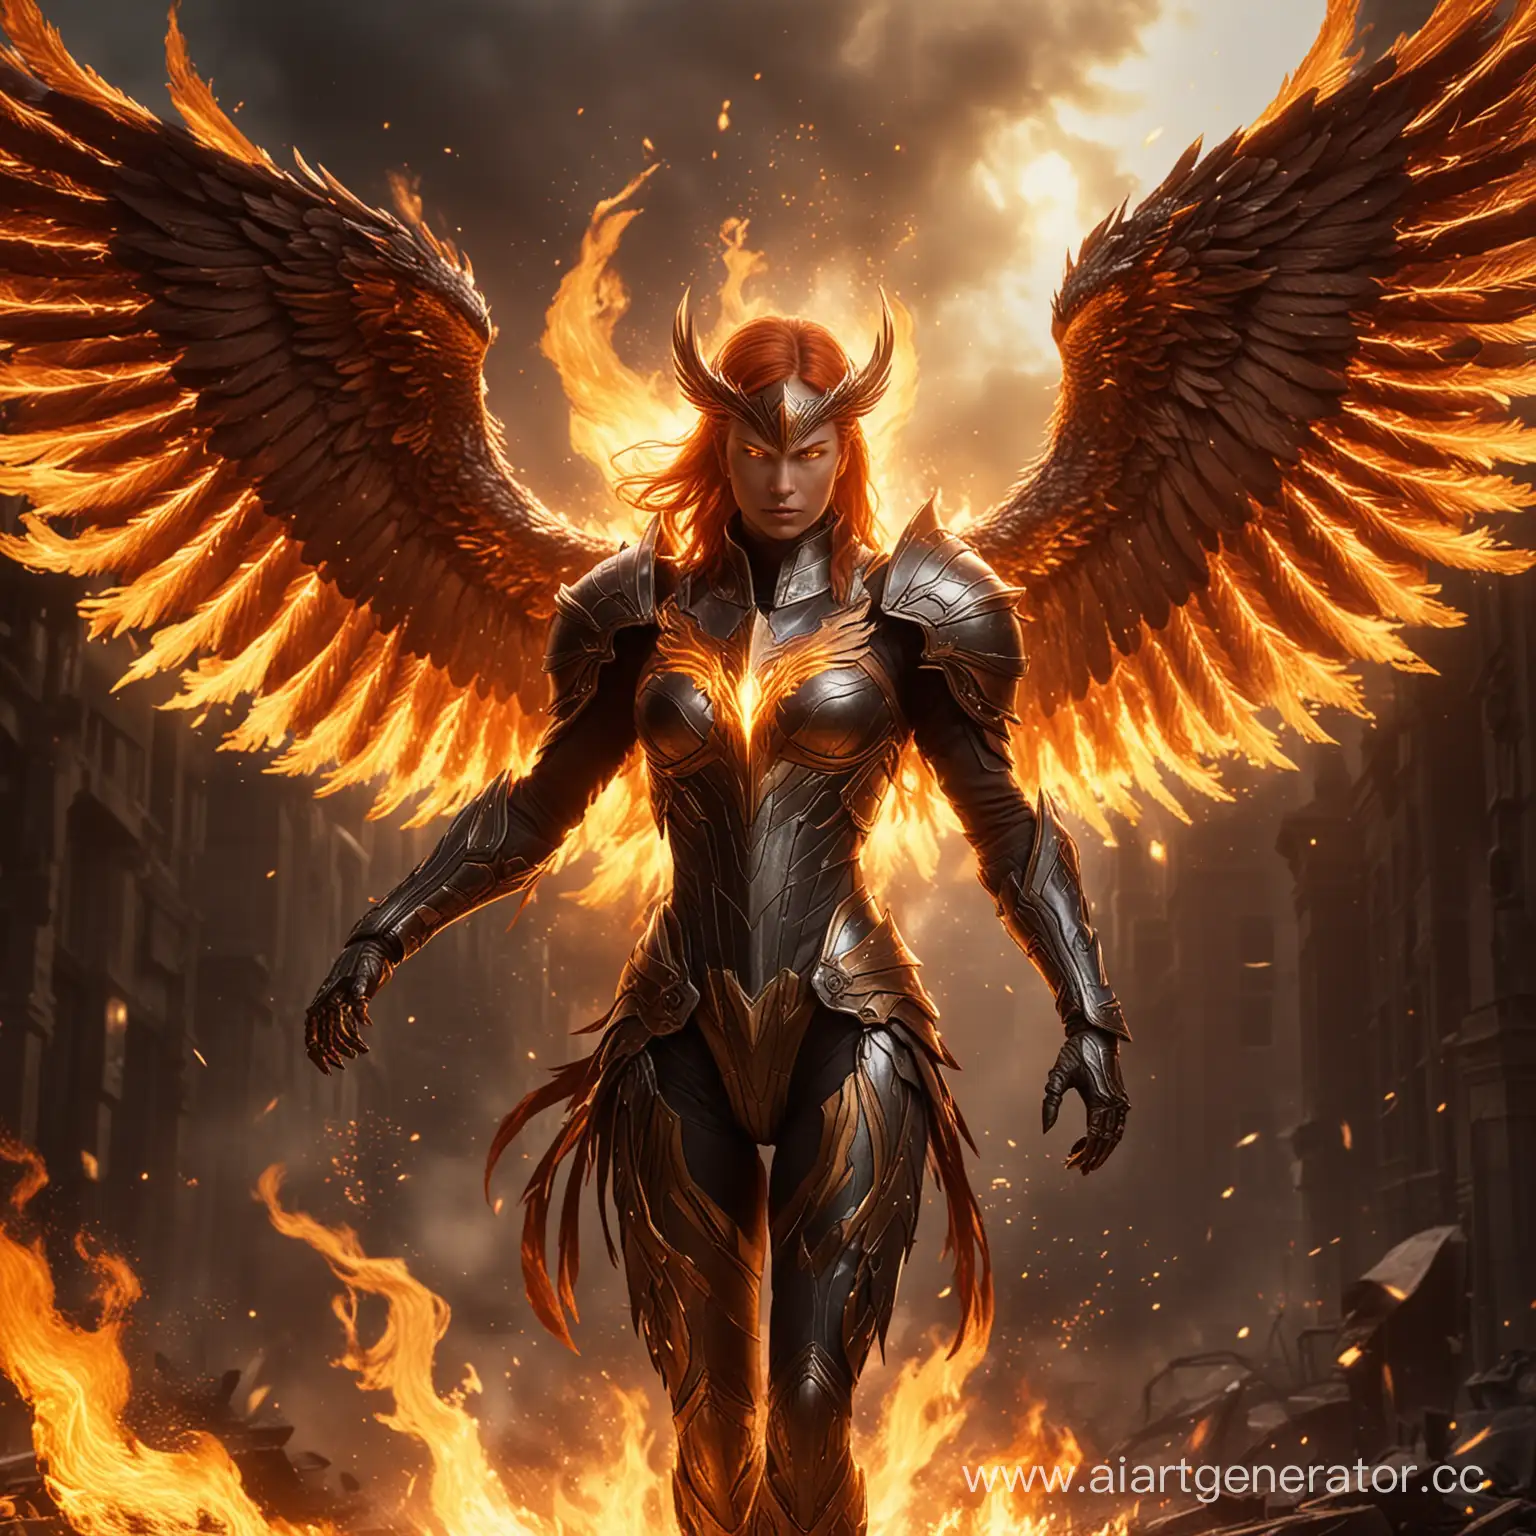 Phoenix Fury: Reborn from fire, wearing armor that glows with the intensity of flames, capable of rising from the ashes with renewed strength. Make it cinematic 